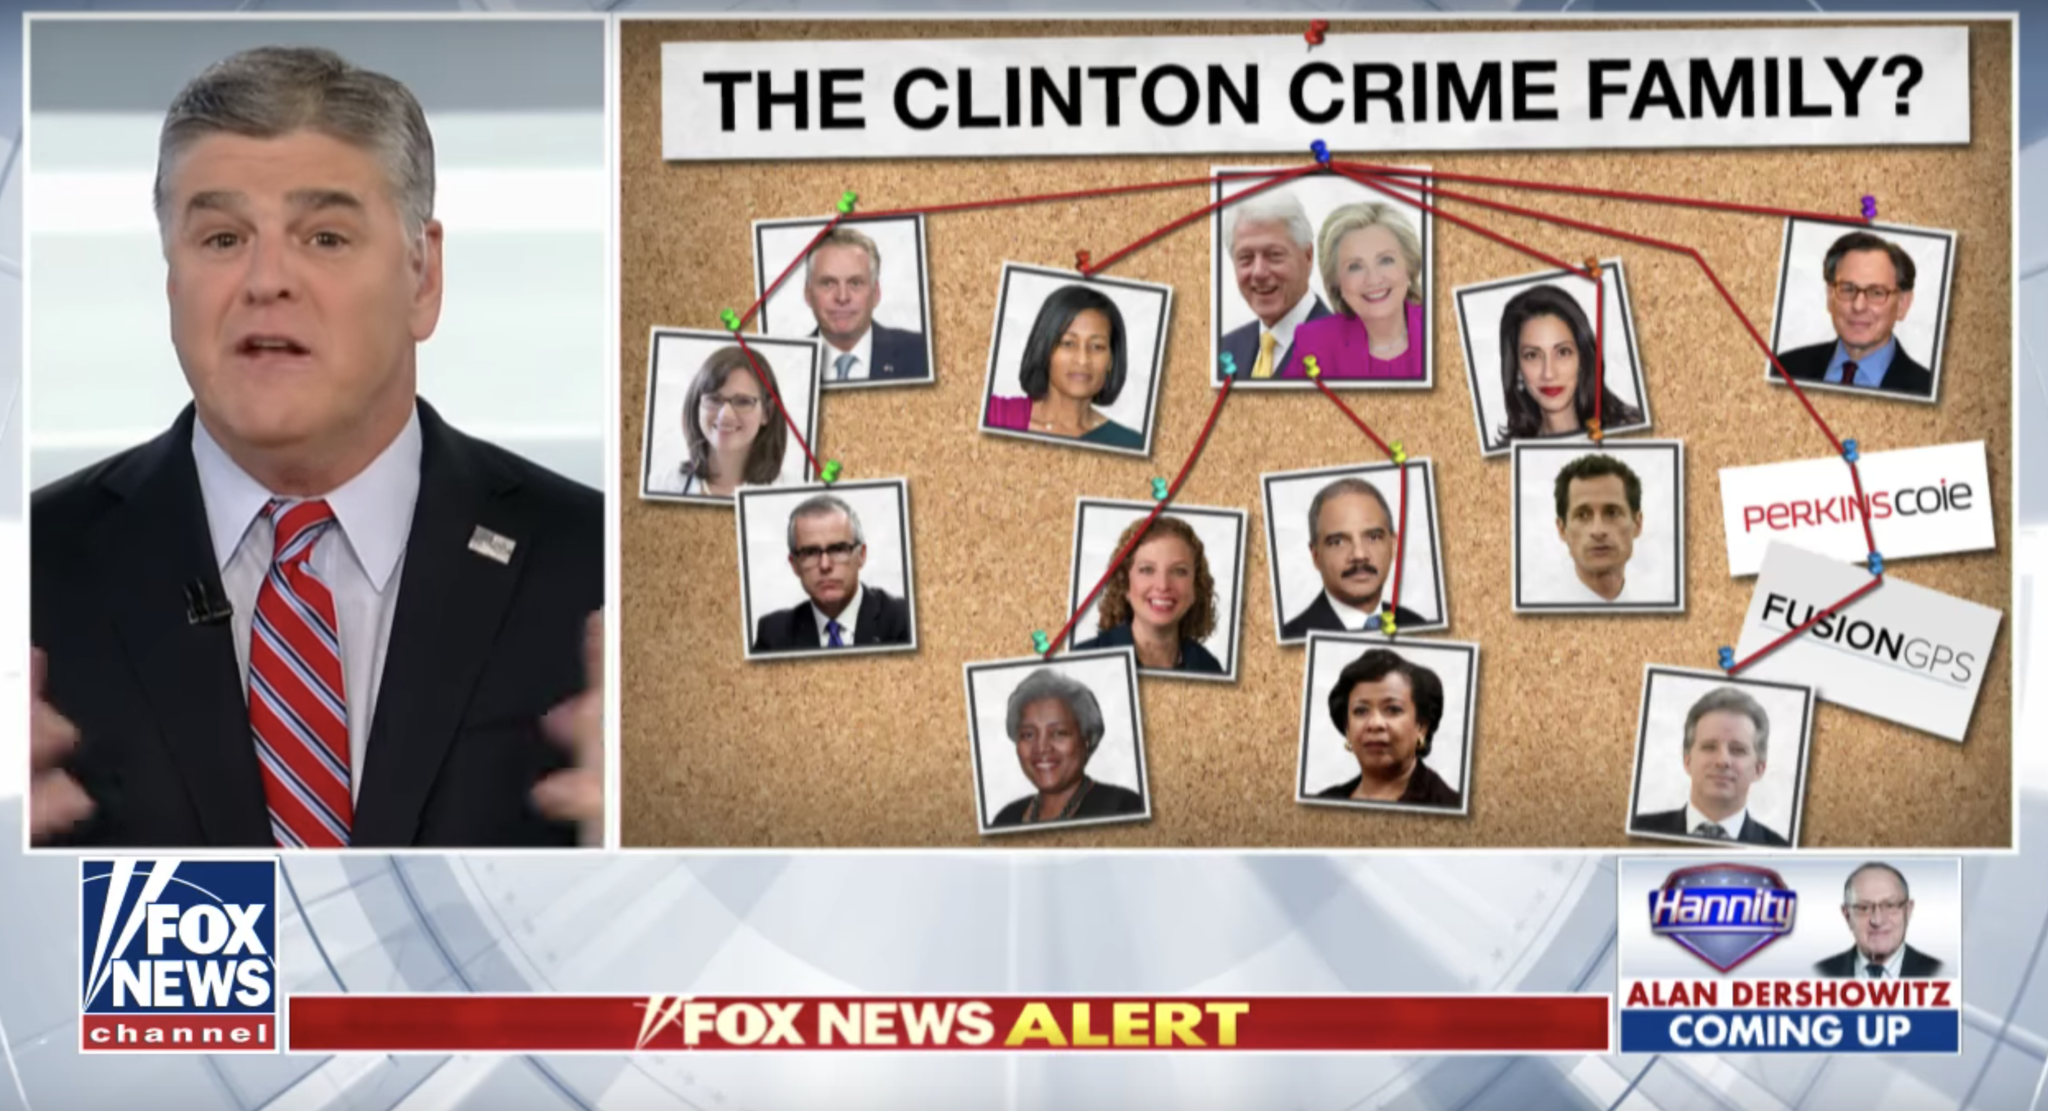 Trump touts Hannity's show on 'Deep State crime families' led by Mueller, Comey and ...